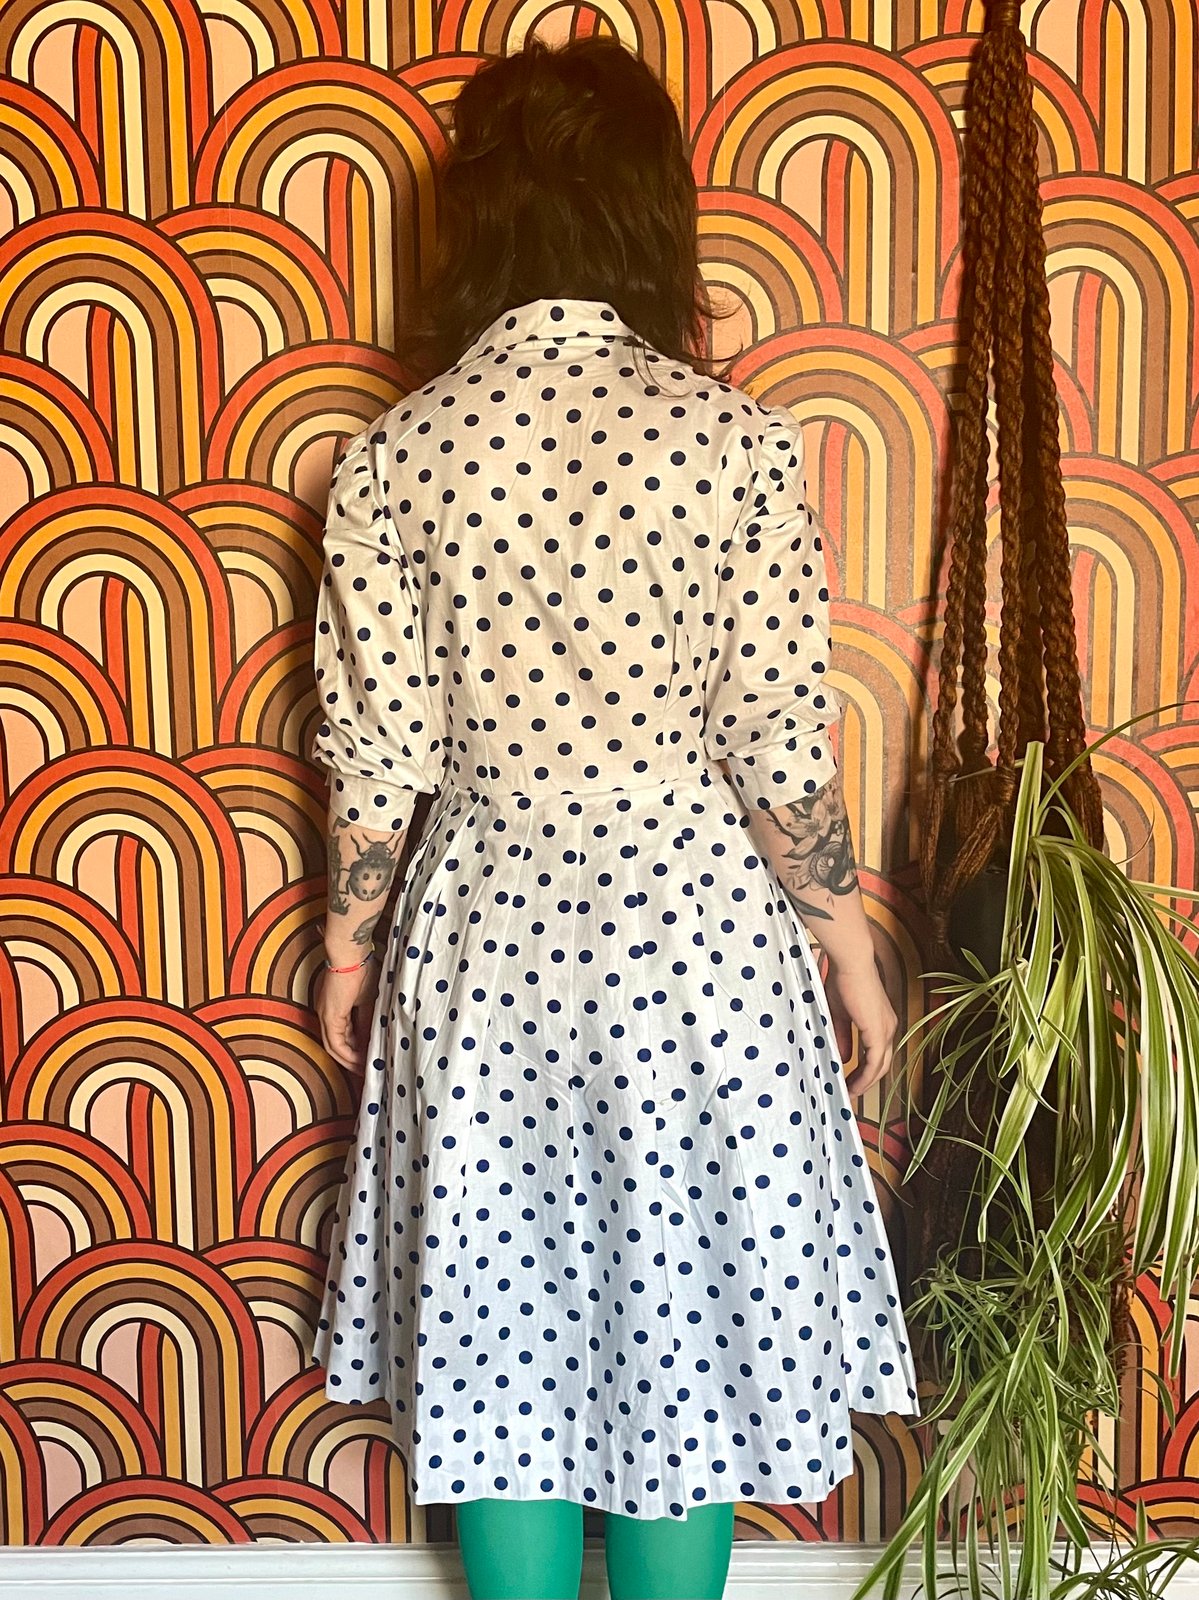 Vintage 50s 60s Polka Dot Cotton Fit and Flare Dress